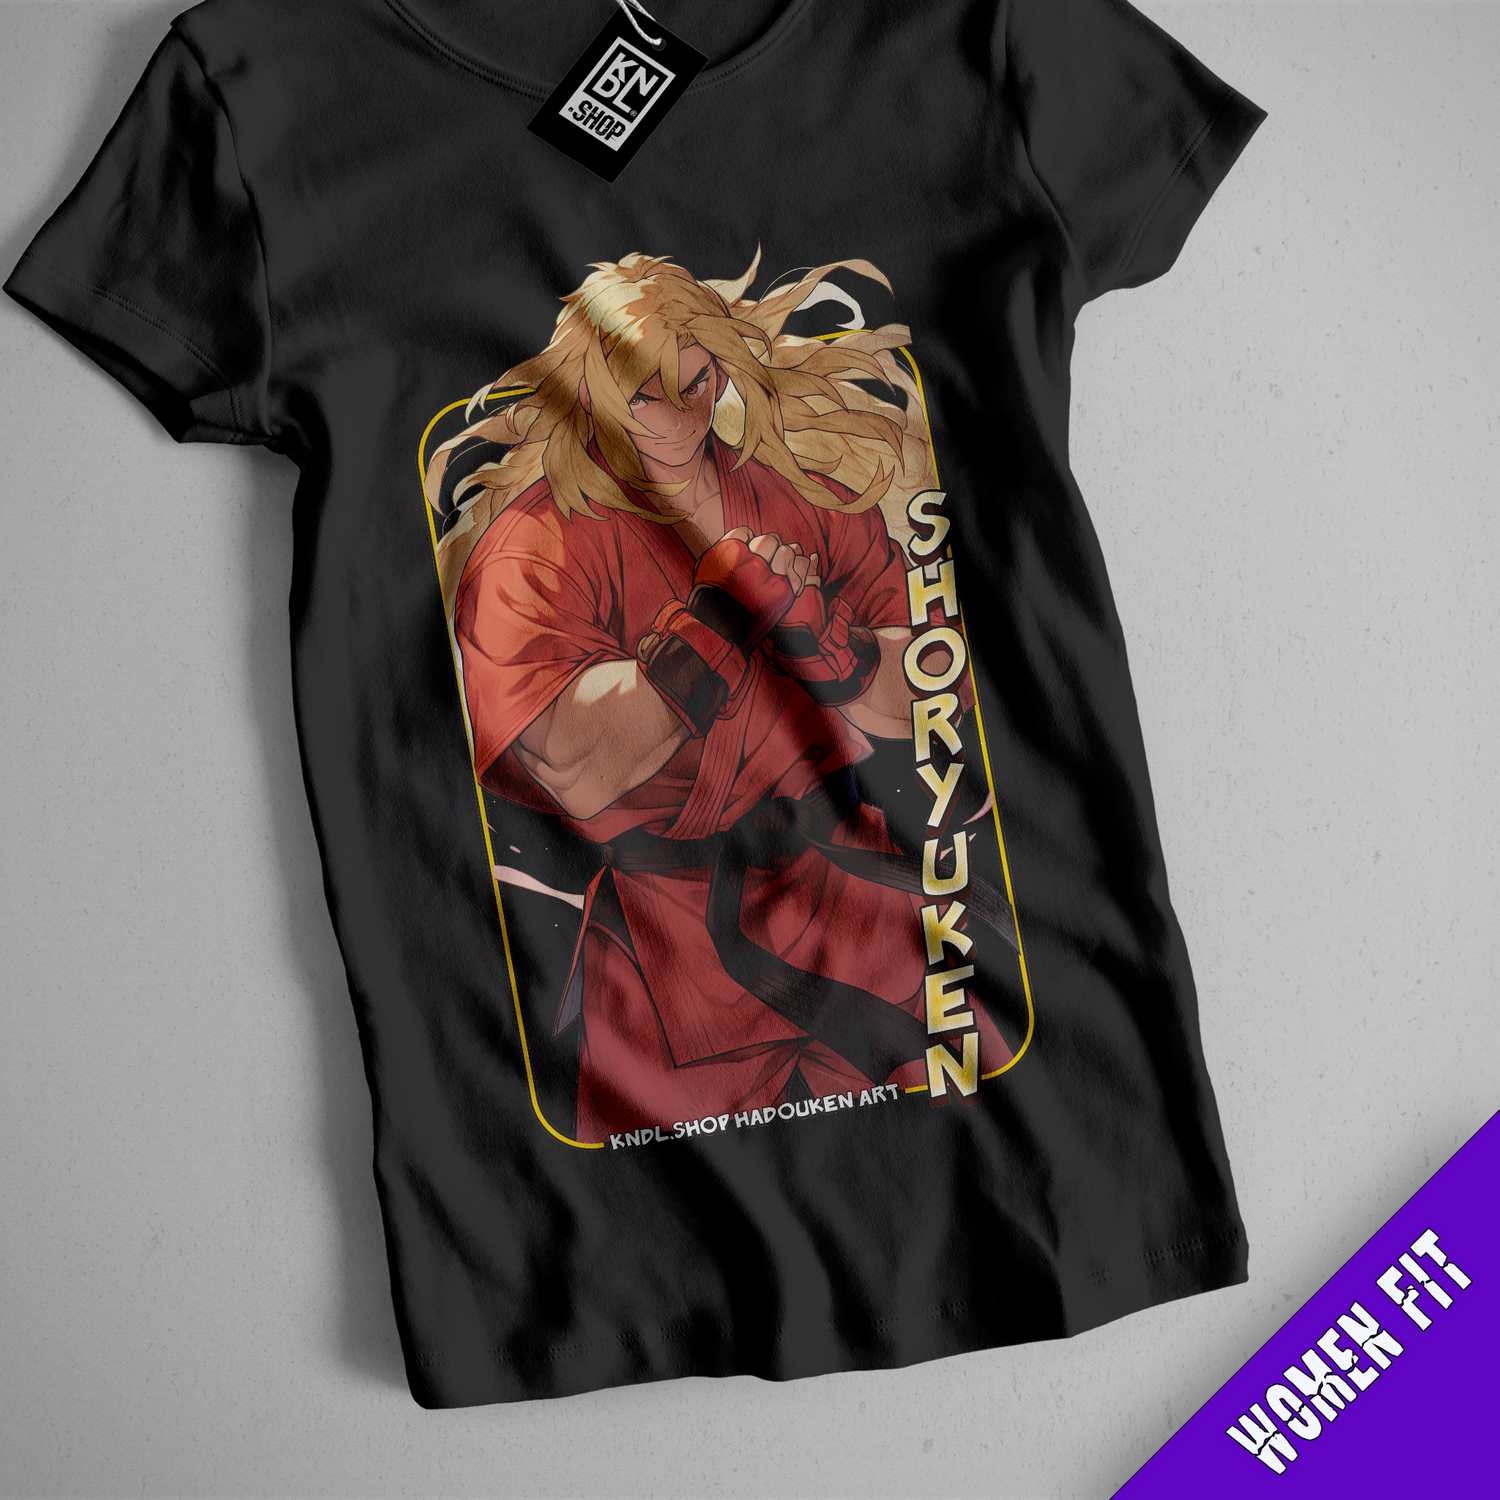 a t - shirt with a picture of a woman holding a sword